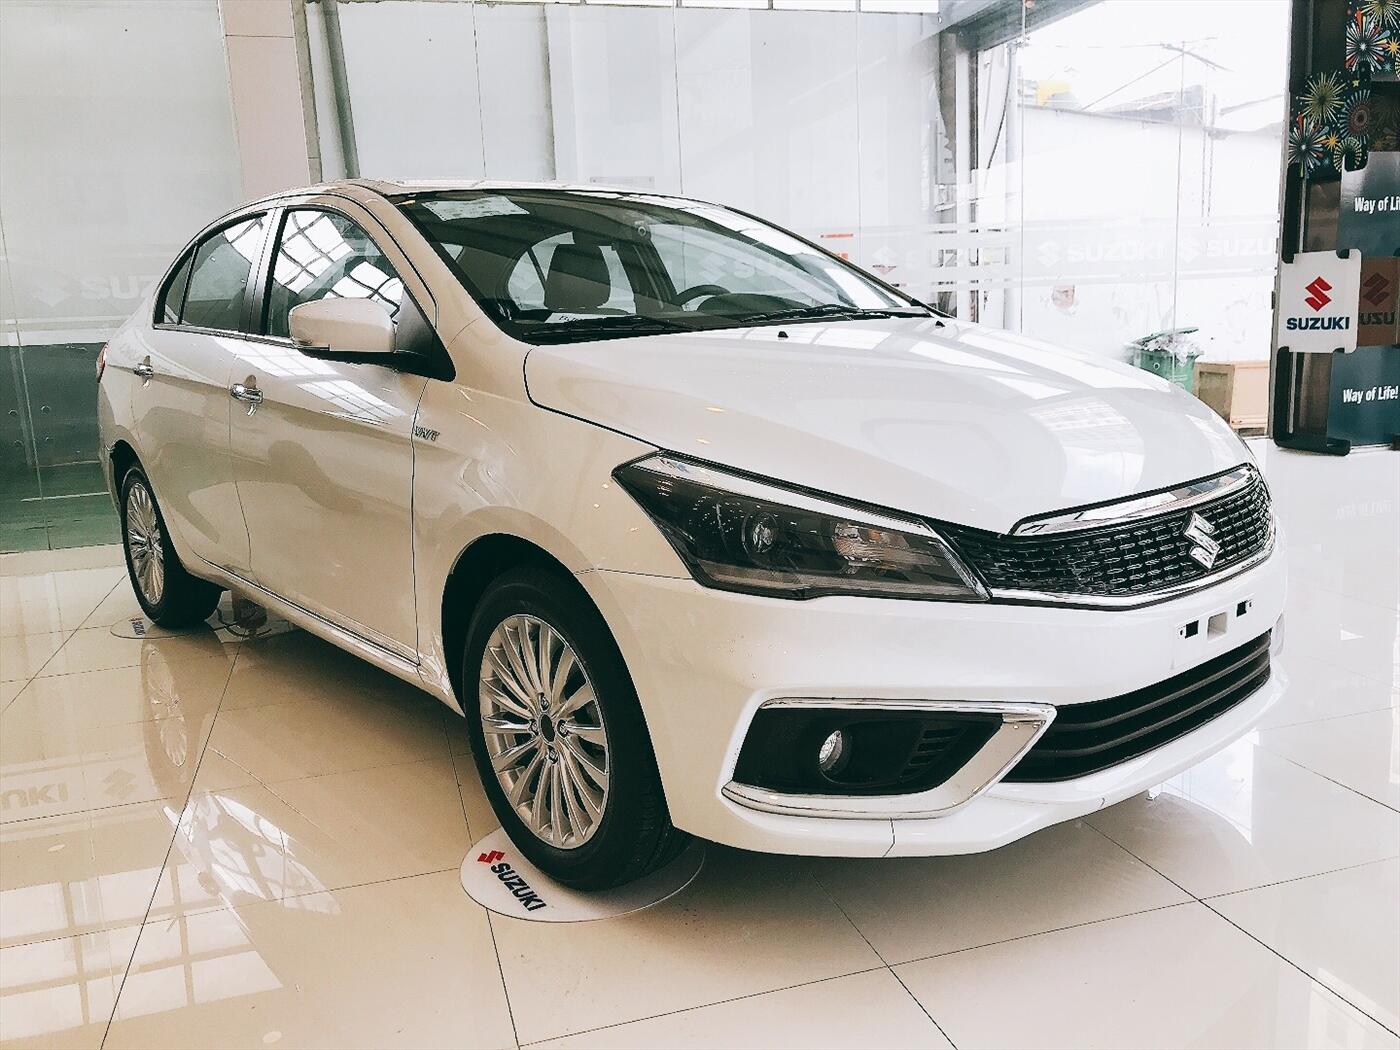 2019 Suzuki Ciaz catches up with rivals in a well-deserved facelift |  Autodeal